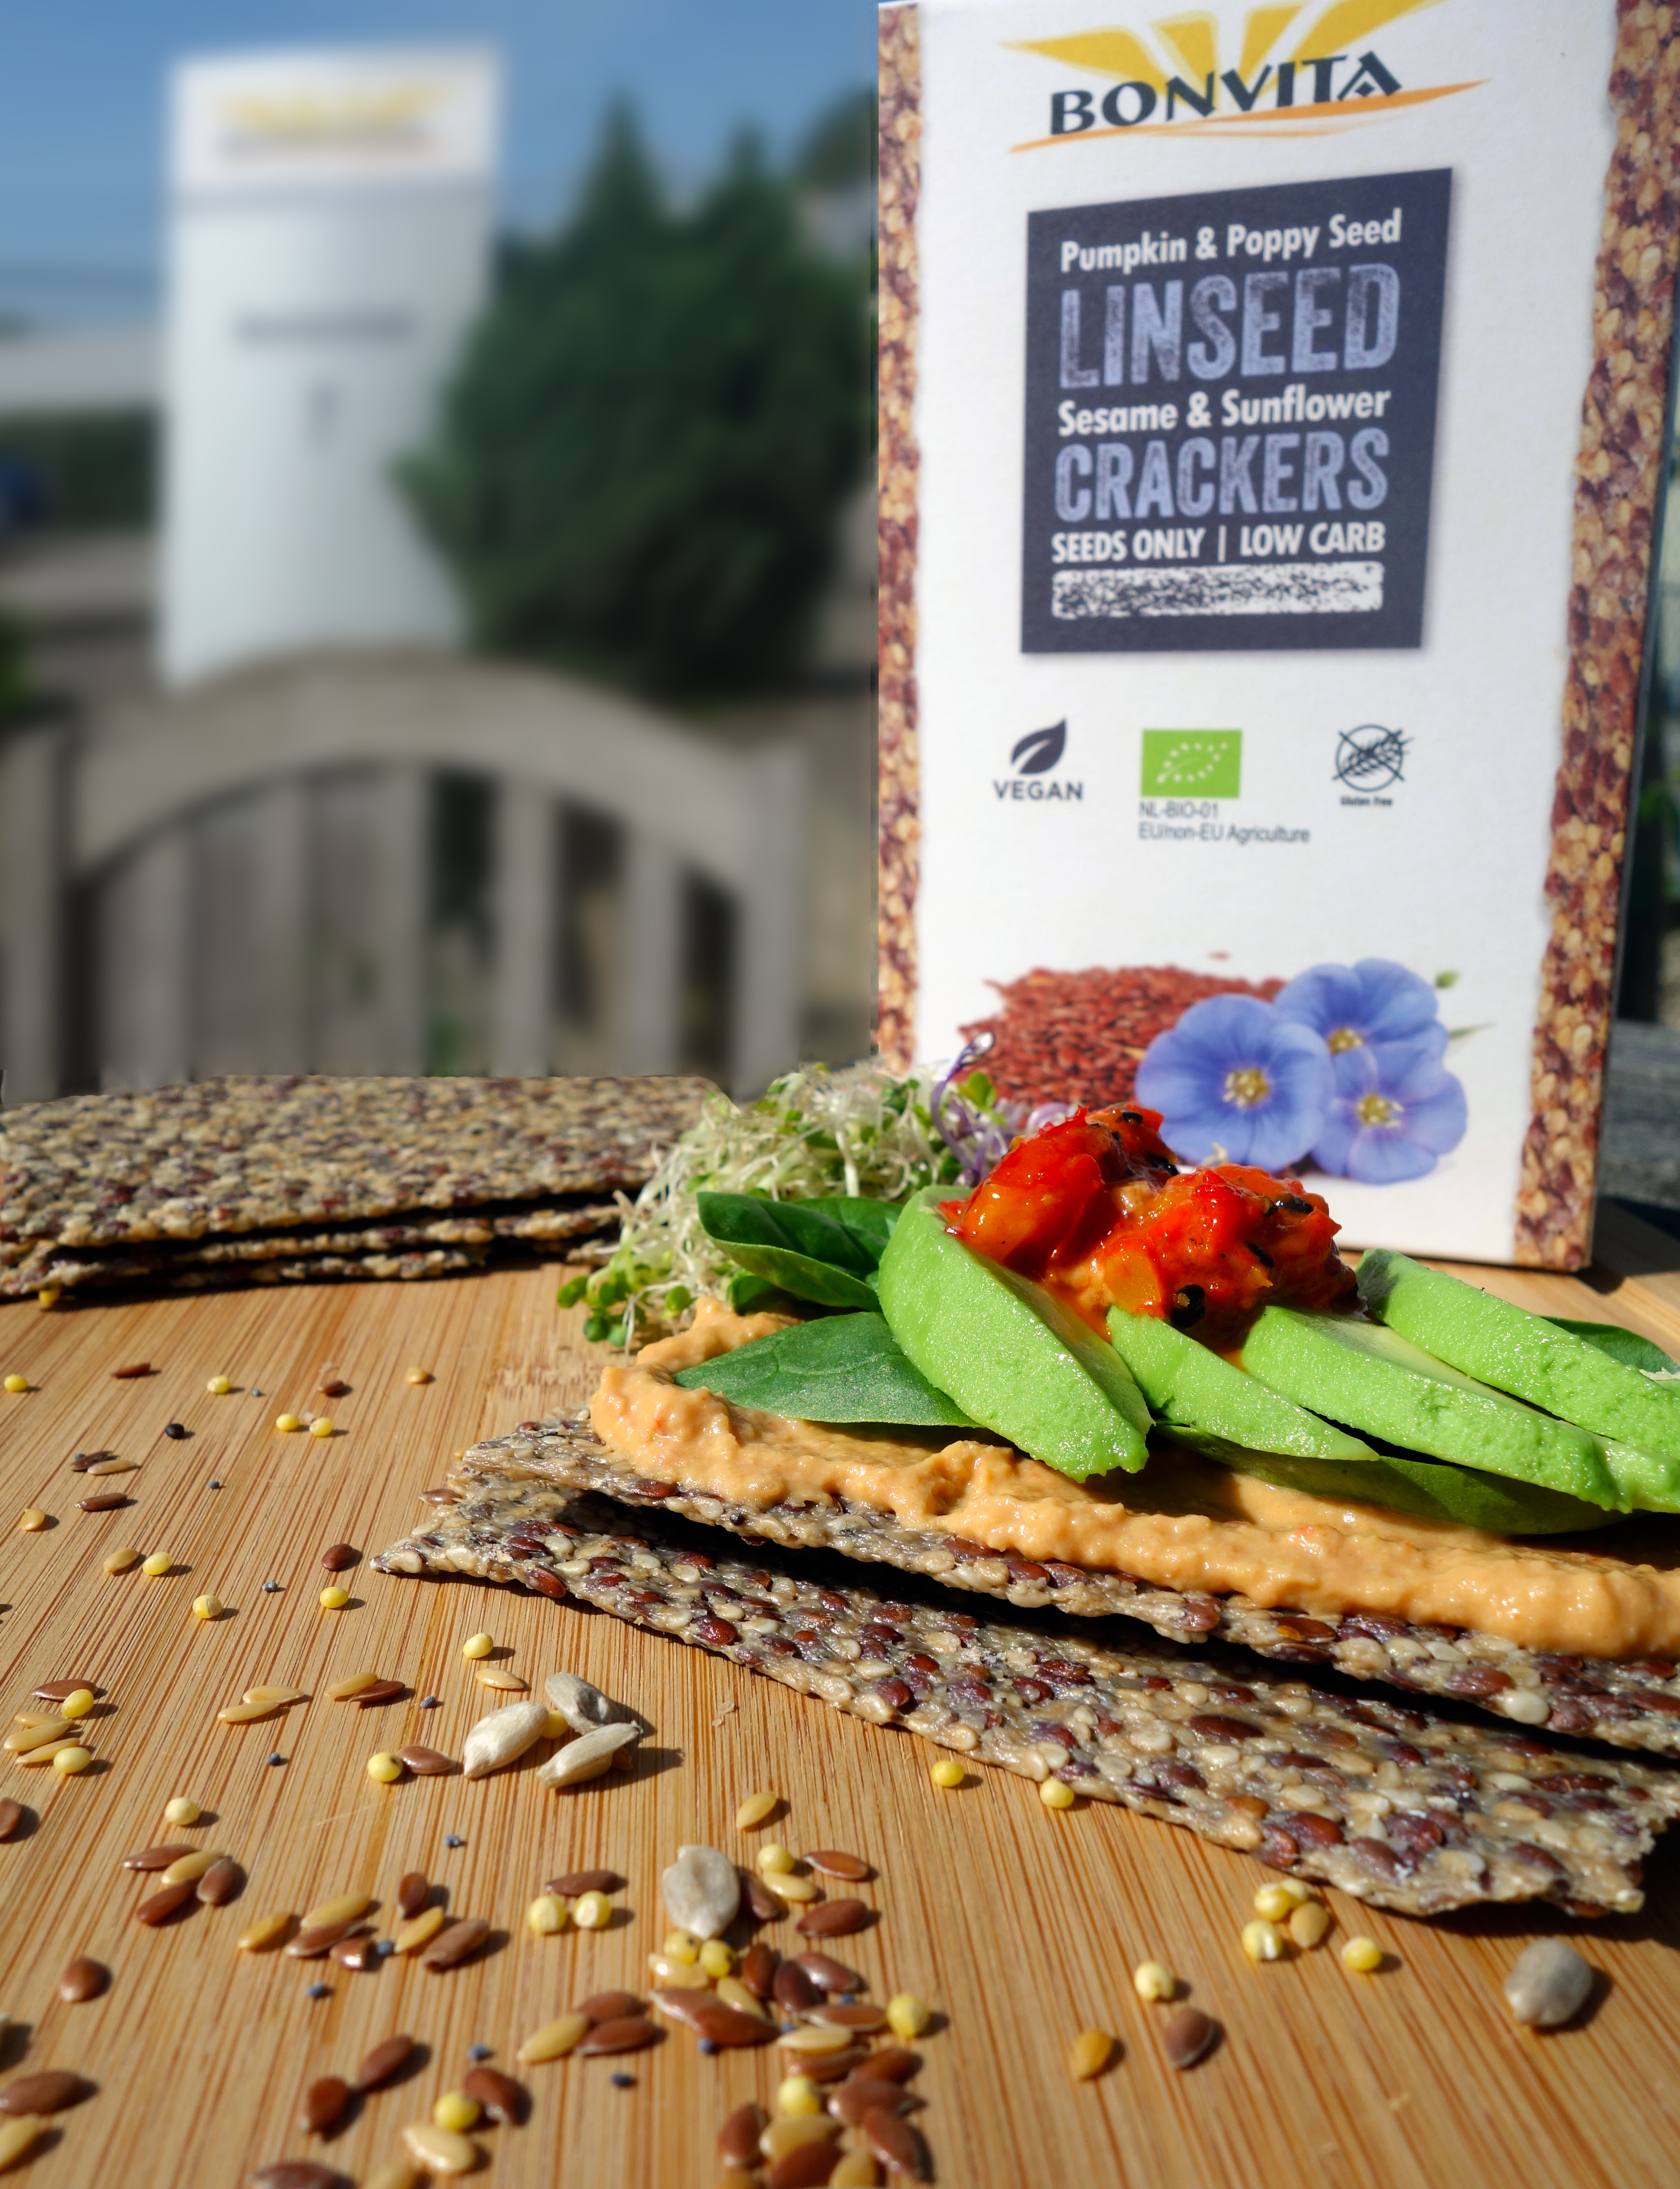 Linseed crackers with grilled vegetable spread and avocado 